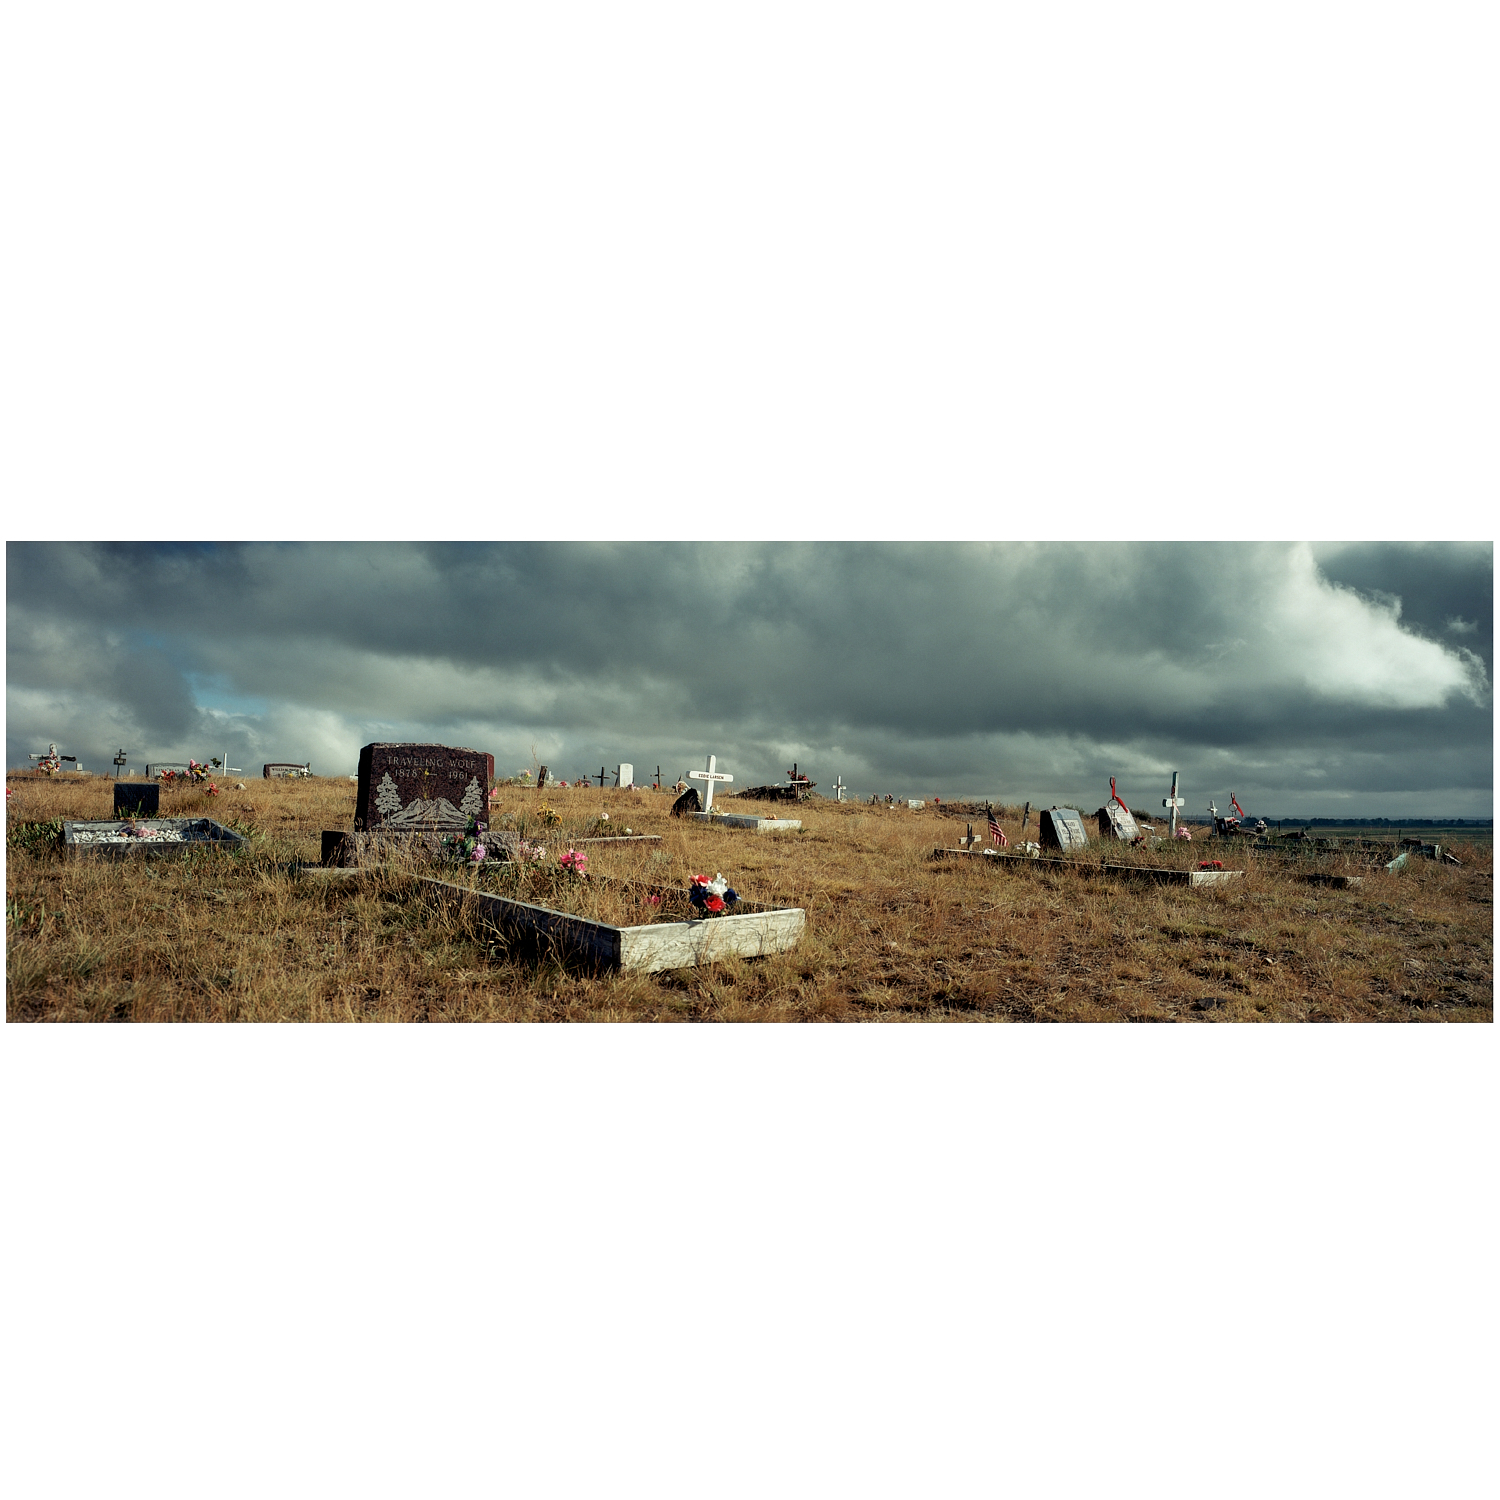 WIM WENDERS LARGE SCALE PHOTOGRAPH  2fbe06